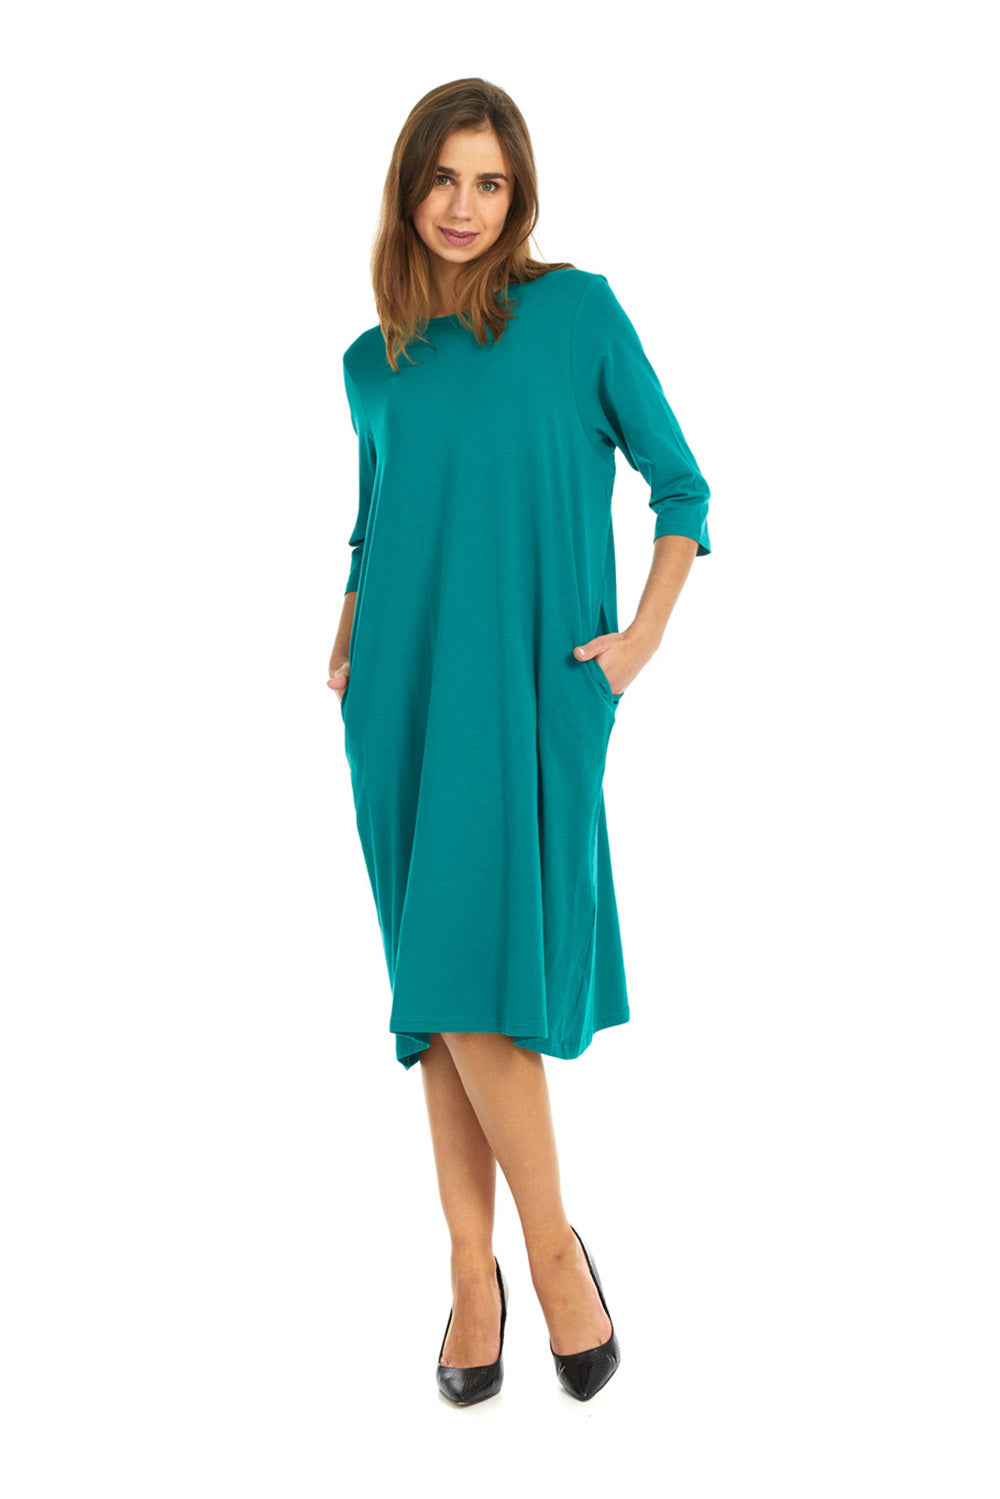 Soft and cozy cotton teal t-shirt dress with pockets. modest 3/4 sleeves and knee length